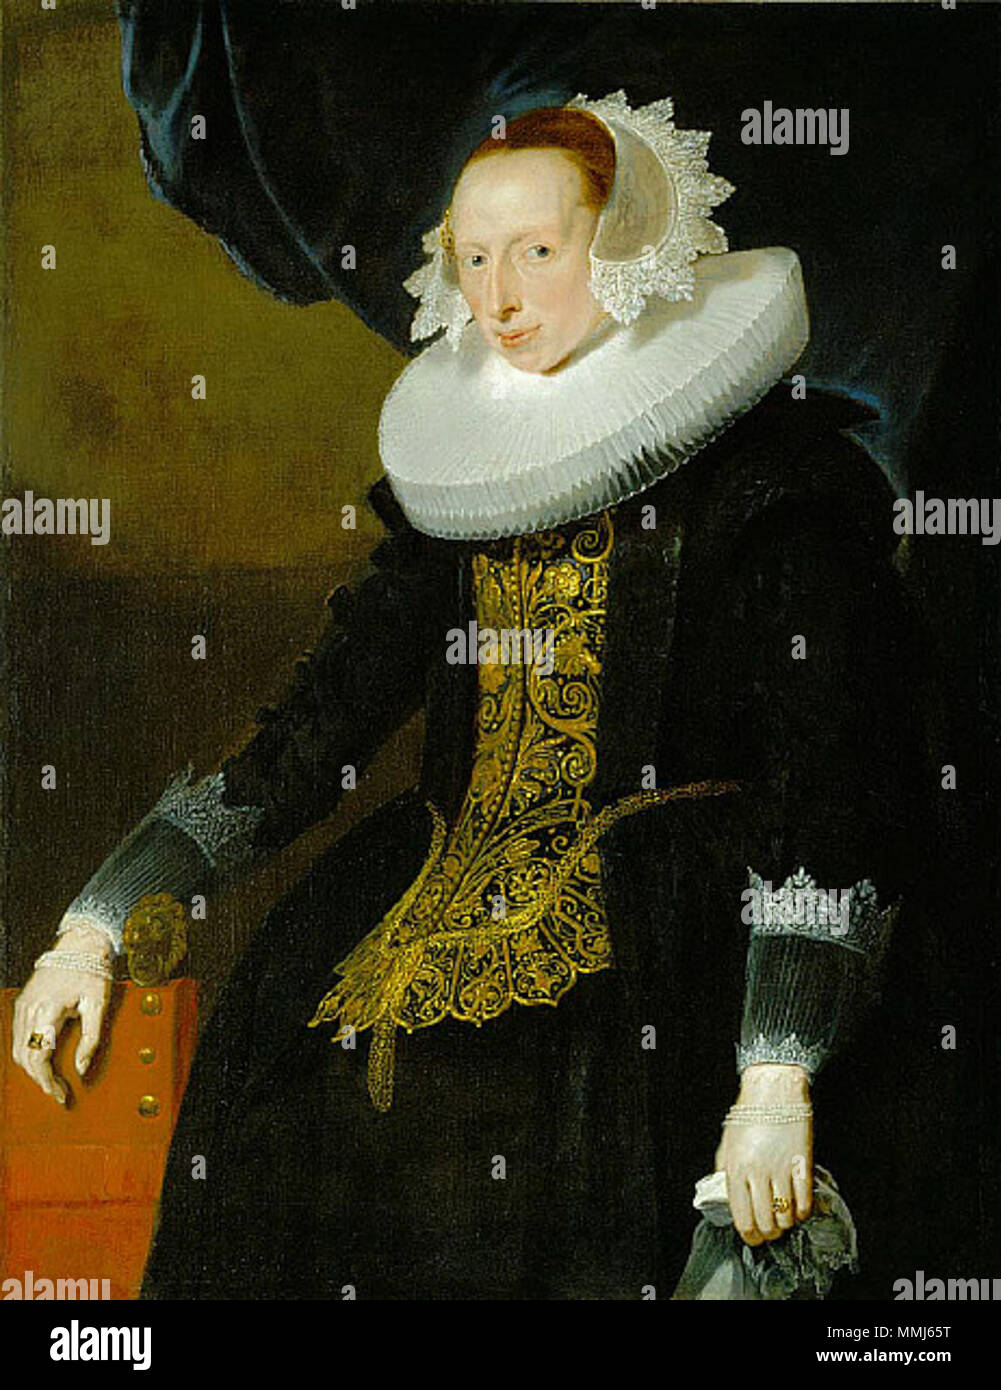 Portrait of a Woman. between 1625 and 1630. Pieter Claesz. Soutman - Portrait of a Woman Stock Photo